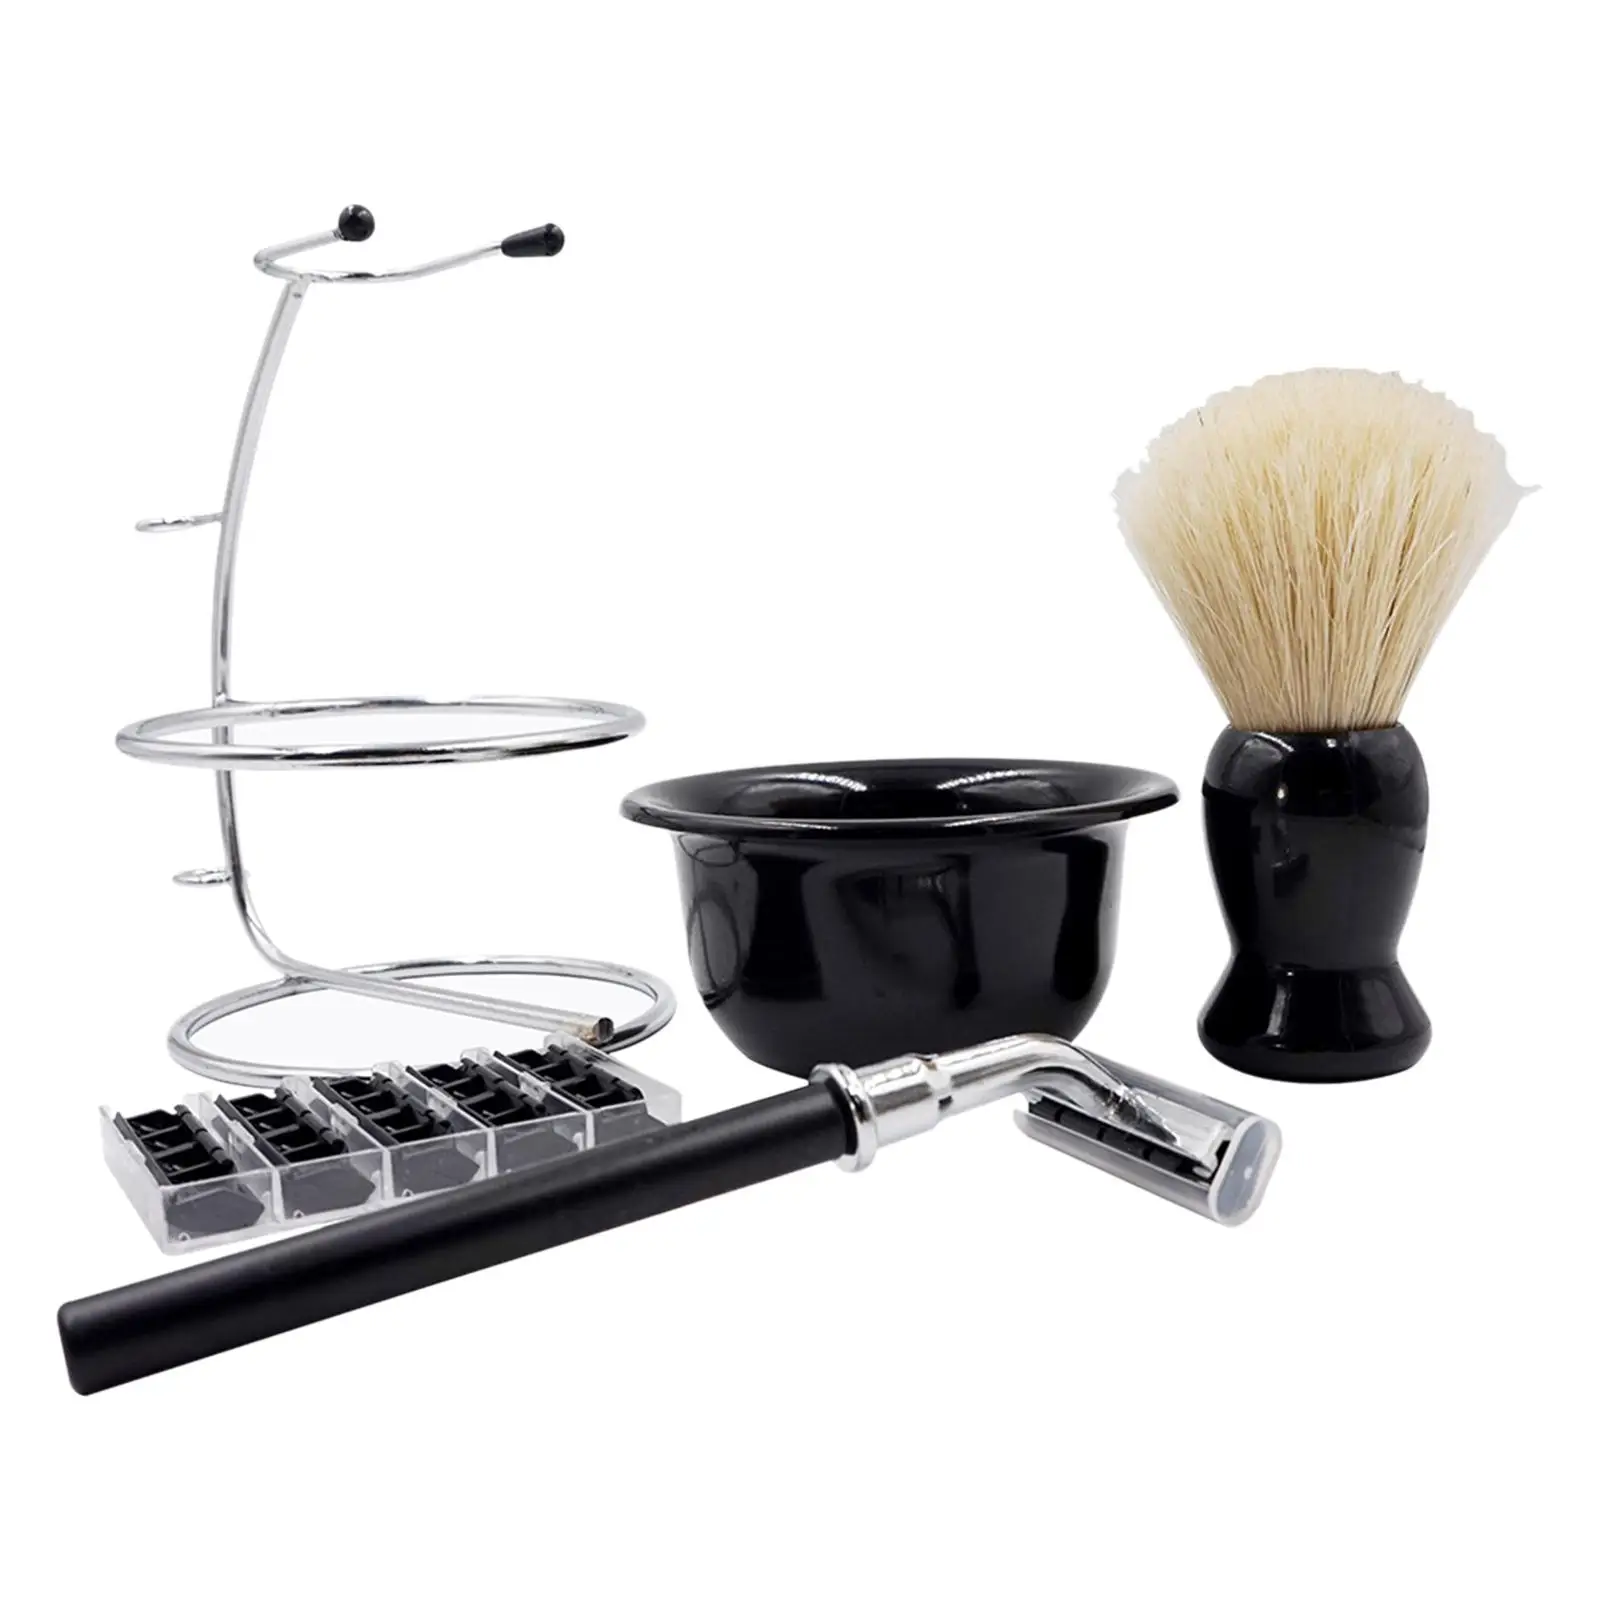 Travel Shaving Kit for Men Manual Stand Brush Bowl Set Portable Accessories Professional Stainess Steel Holder Solid